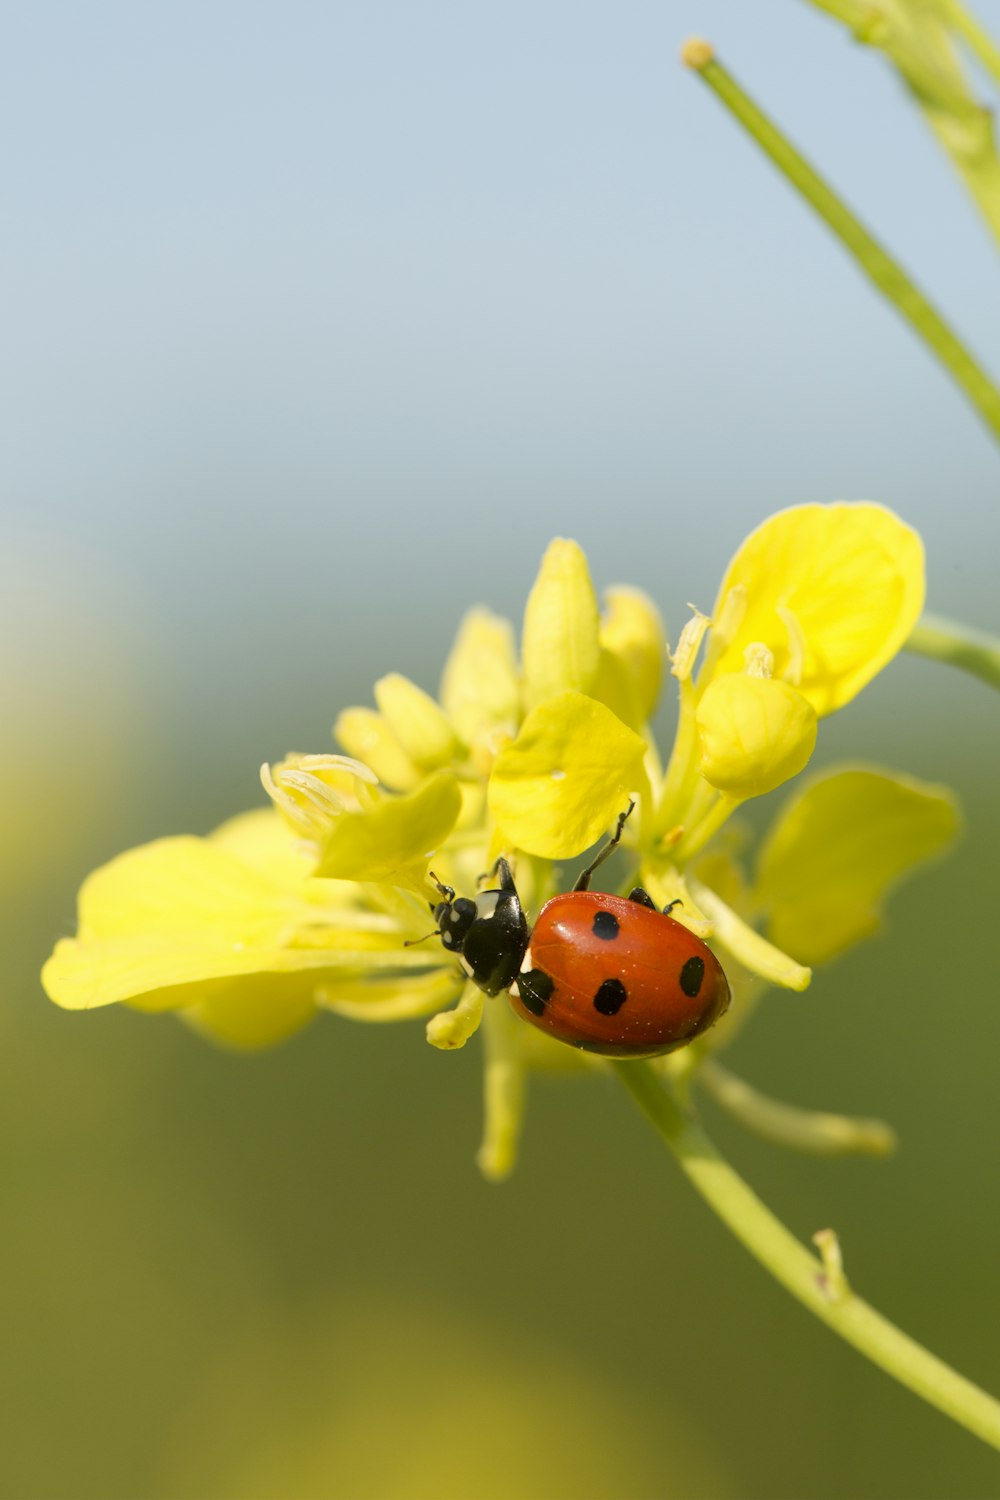 red ladybug perched on yellow flower in close up photography during daytime